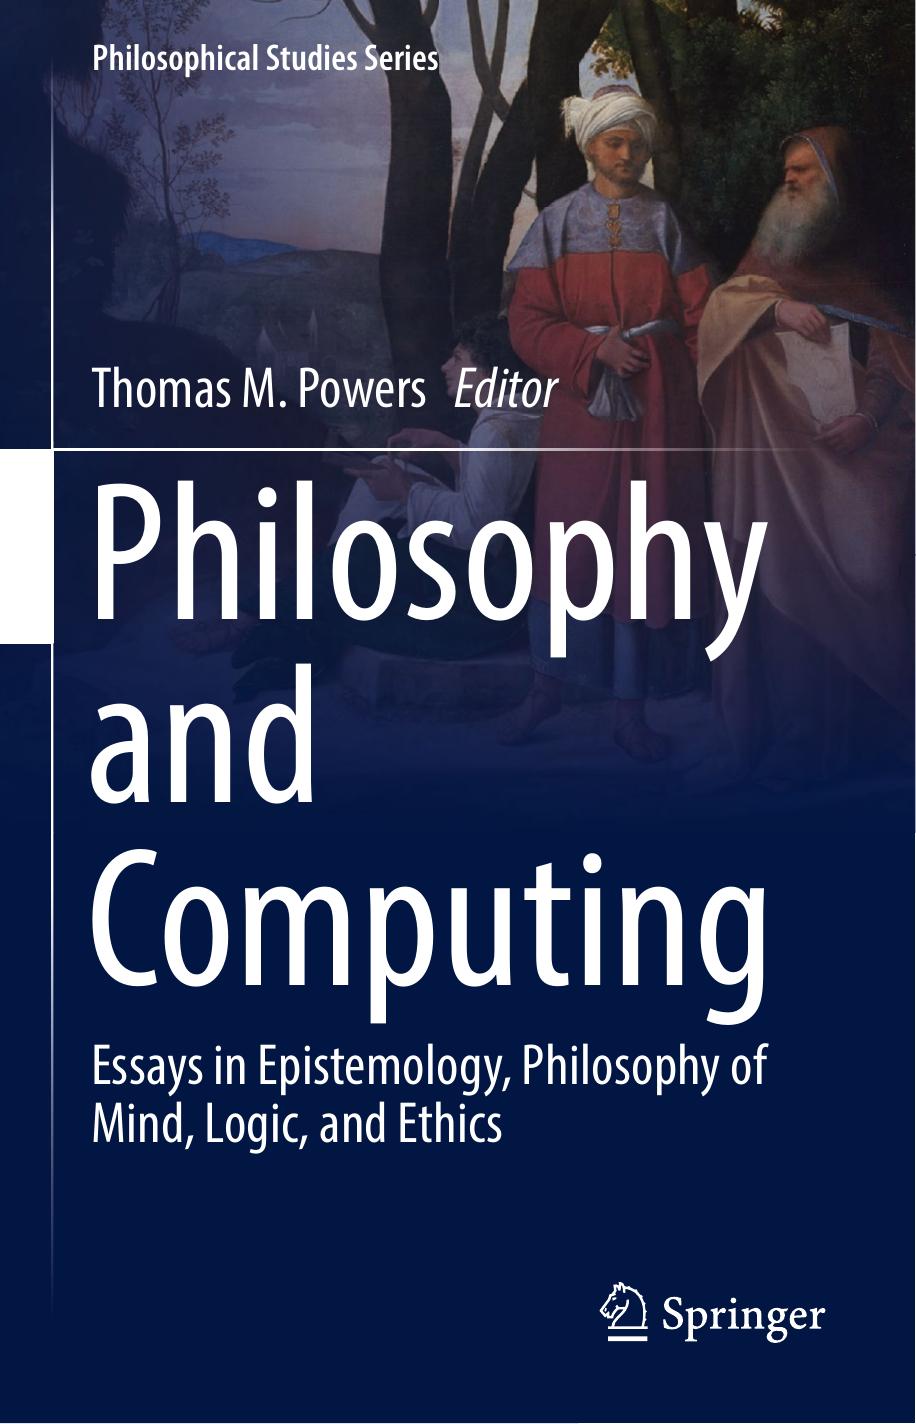 Philosophy and Computing: Essays in Epistemology, Philosophy of Mind, Logic, and Ethics